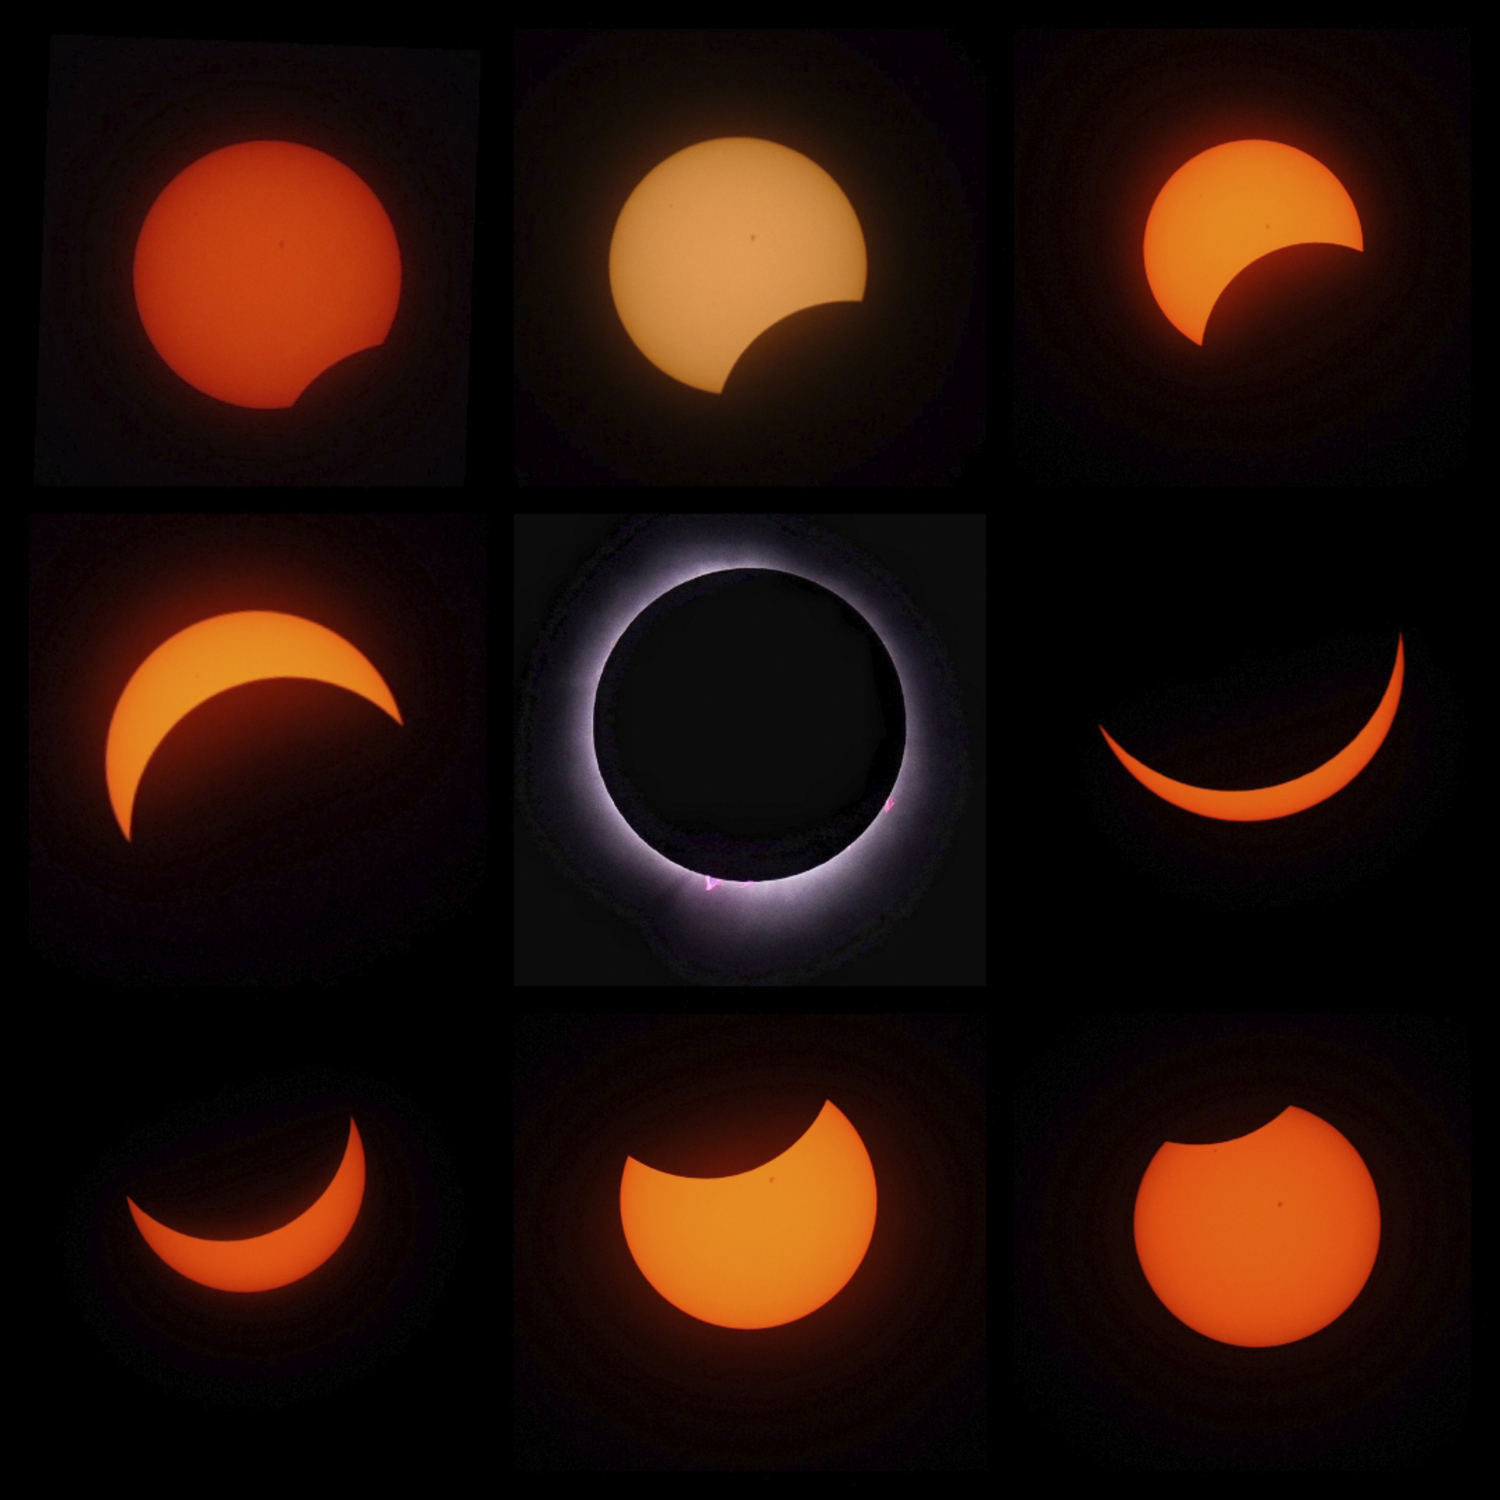 Southampton photographer Danielle Leef was able to capture  the eclipse 